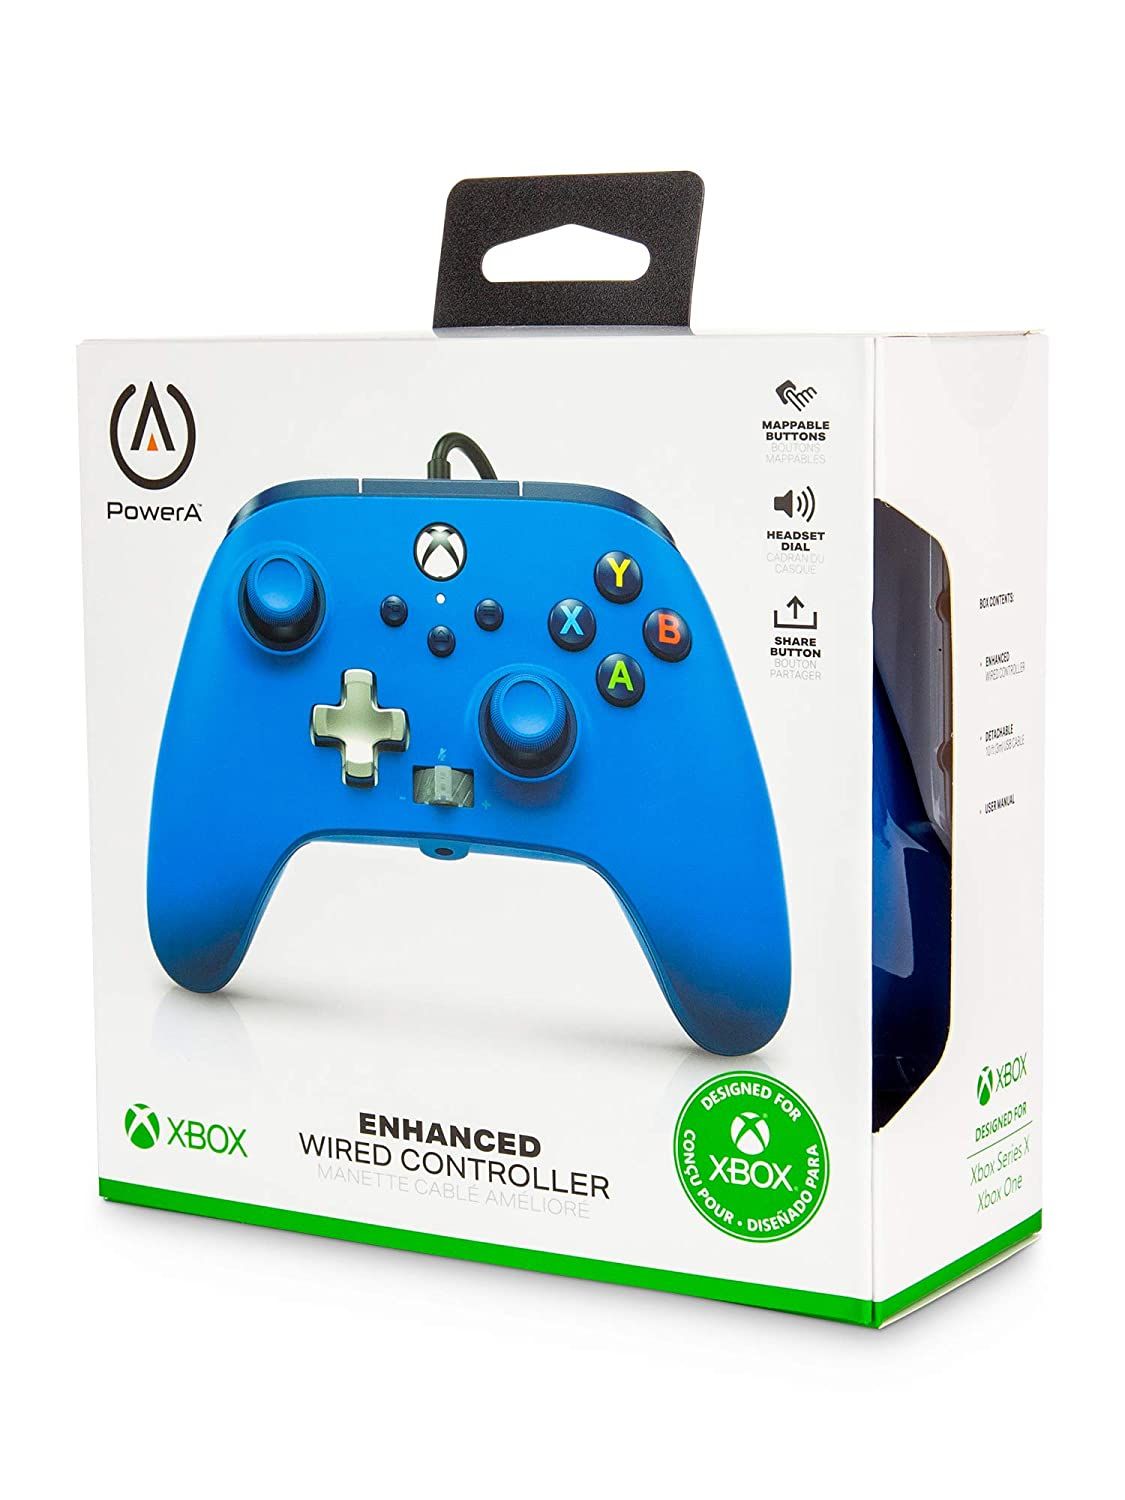 PowerA Enhanced Wired Controller box packaging